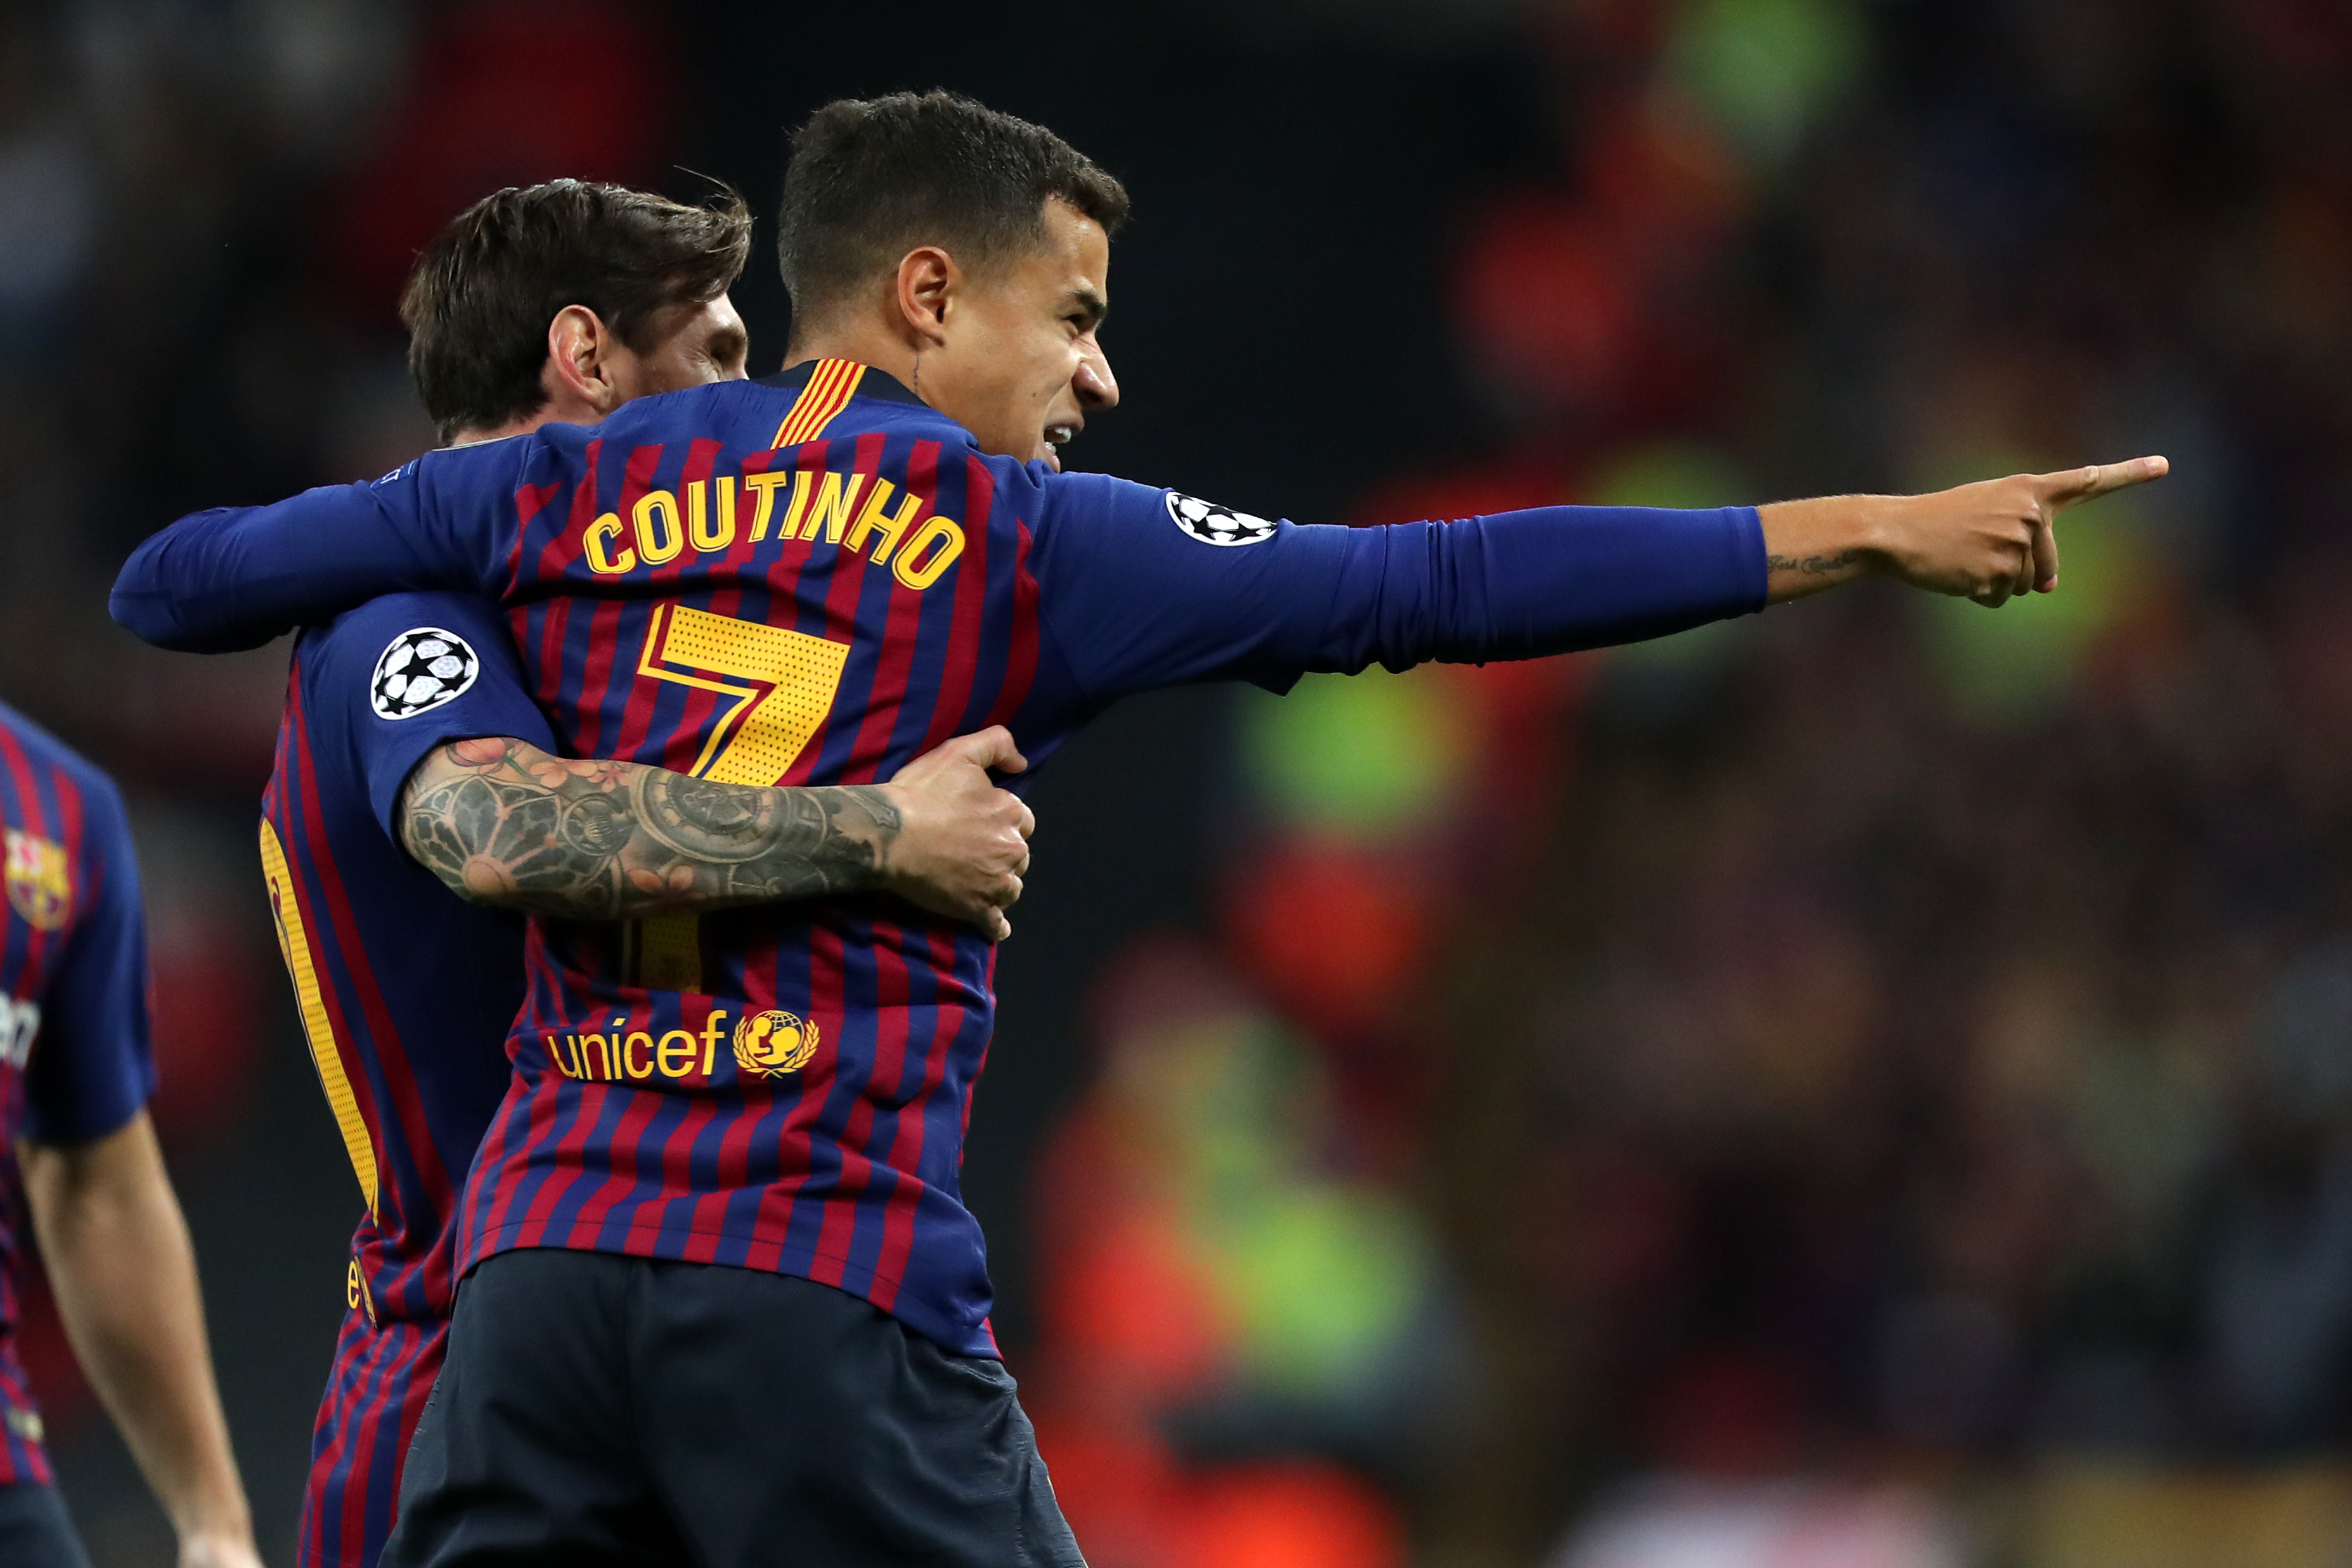 Arsenal transfer rumour round-up: Gunners set for Coutinho boost with Gabriel announcement expected